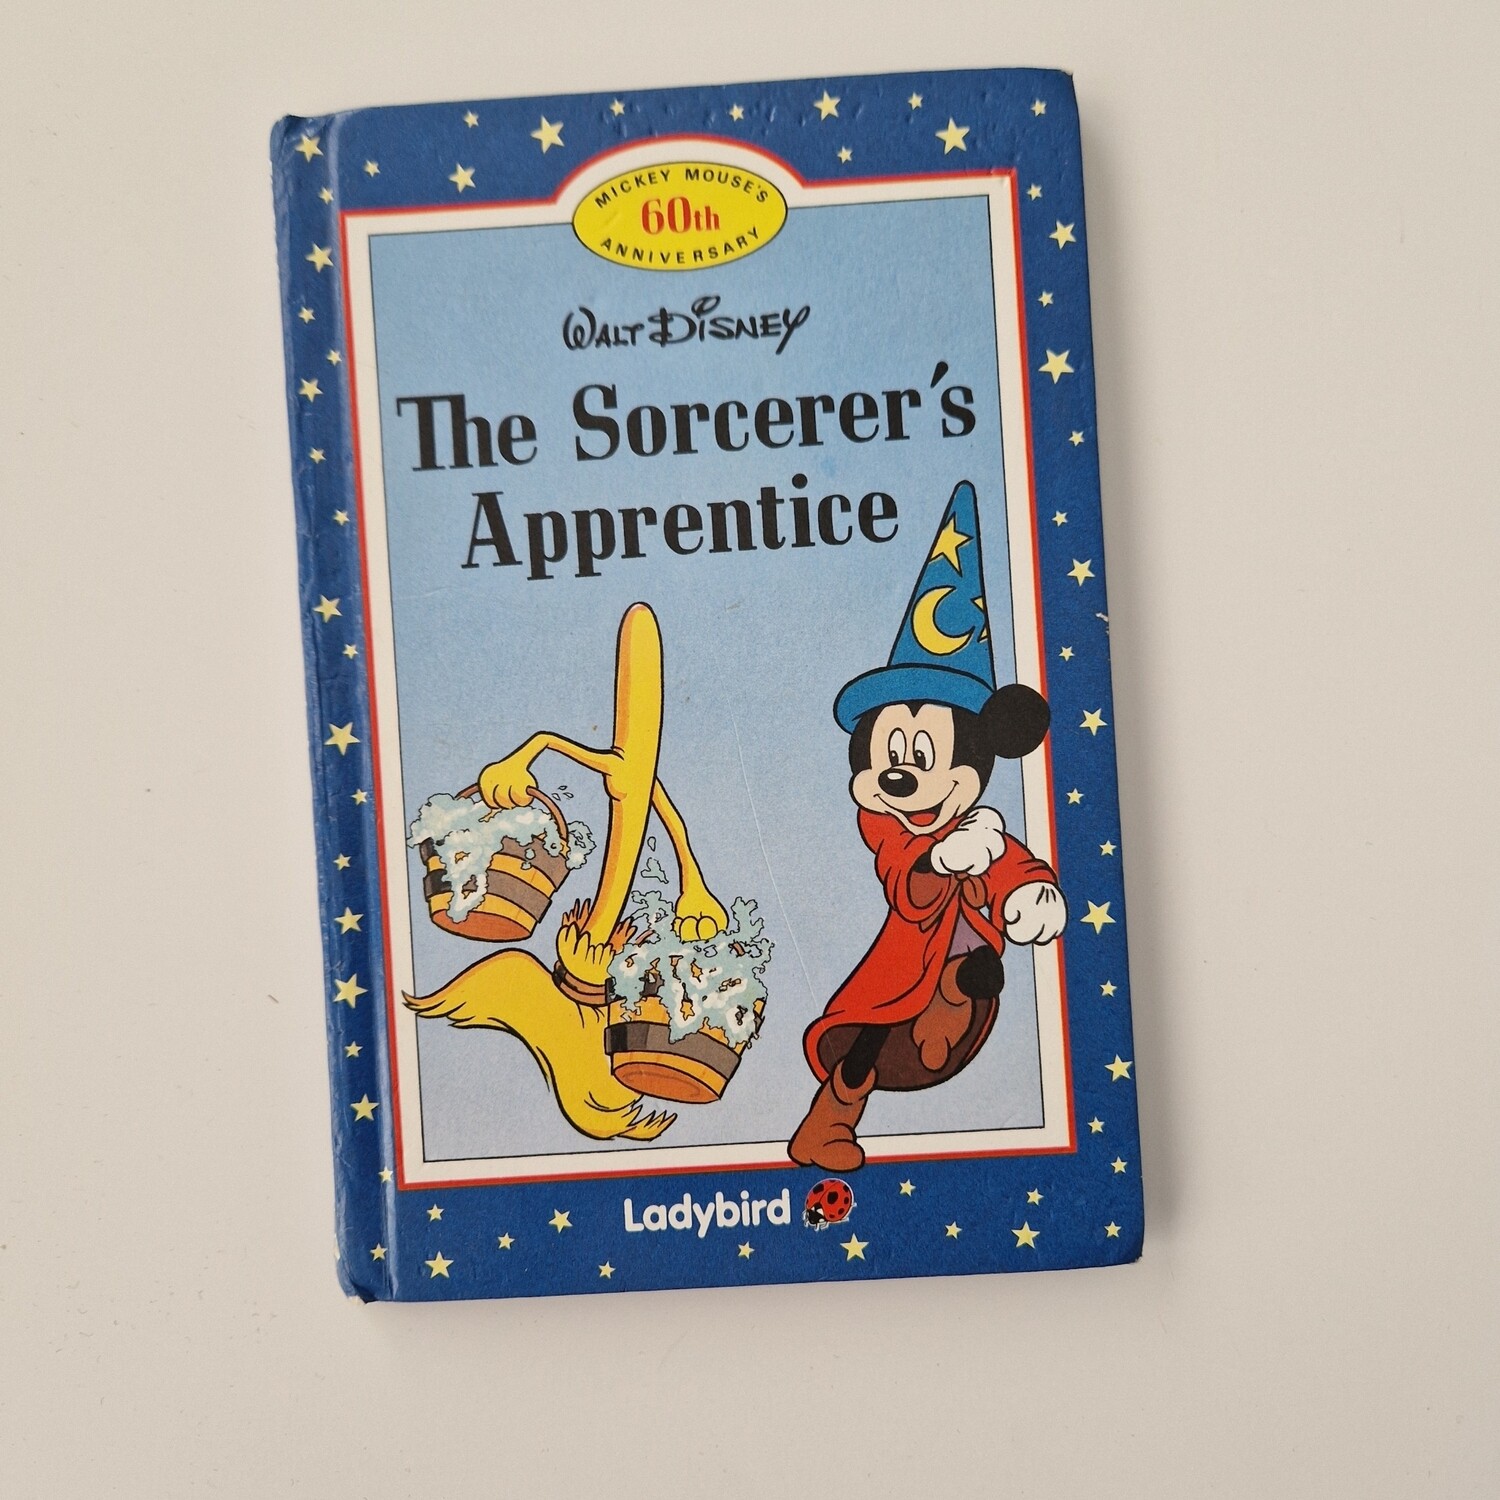 Sorcerer's Apprentice Notebook 60th Anniversary - recycled Disney